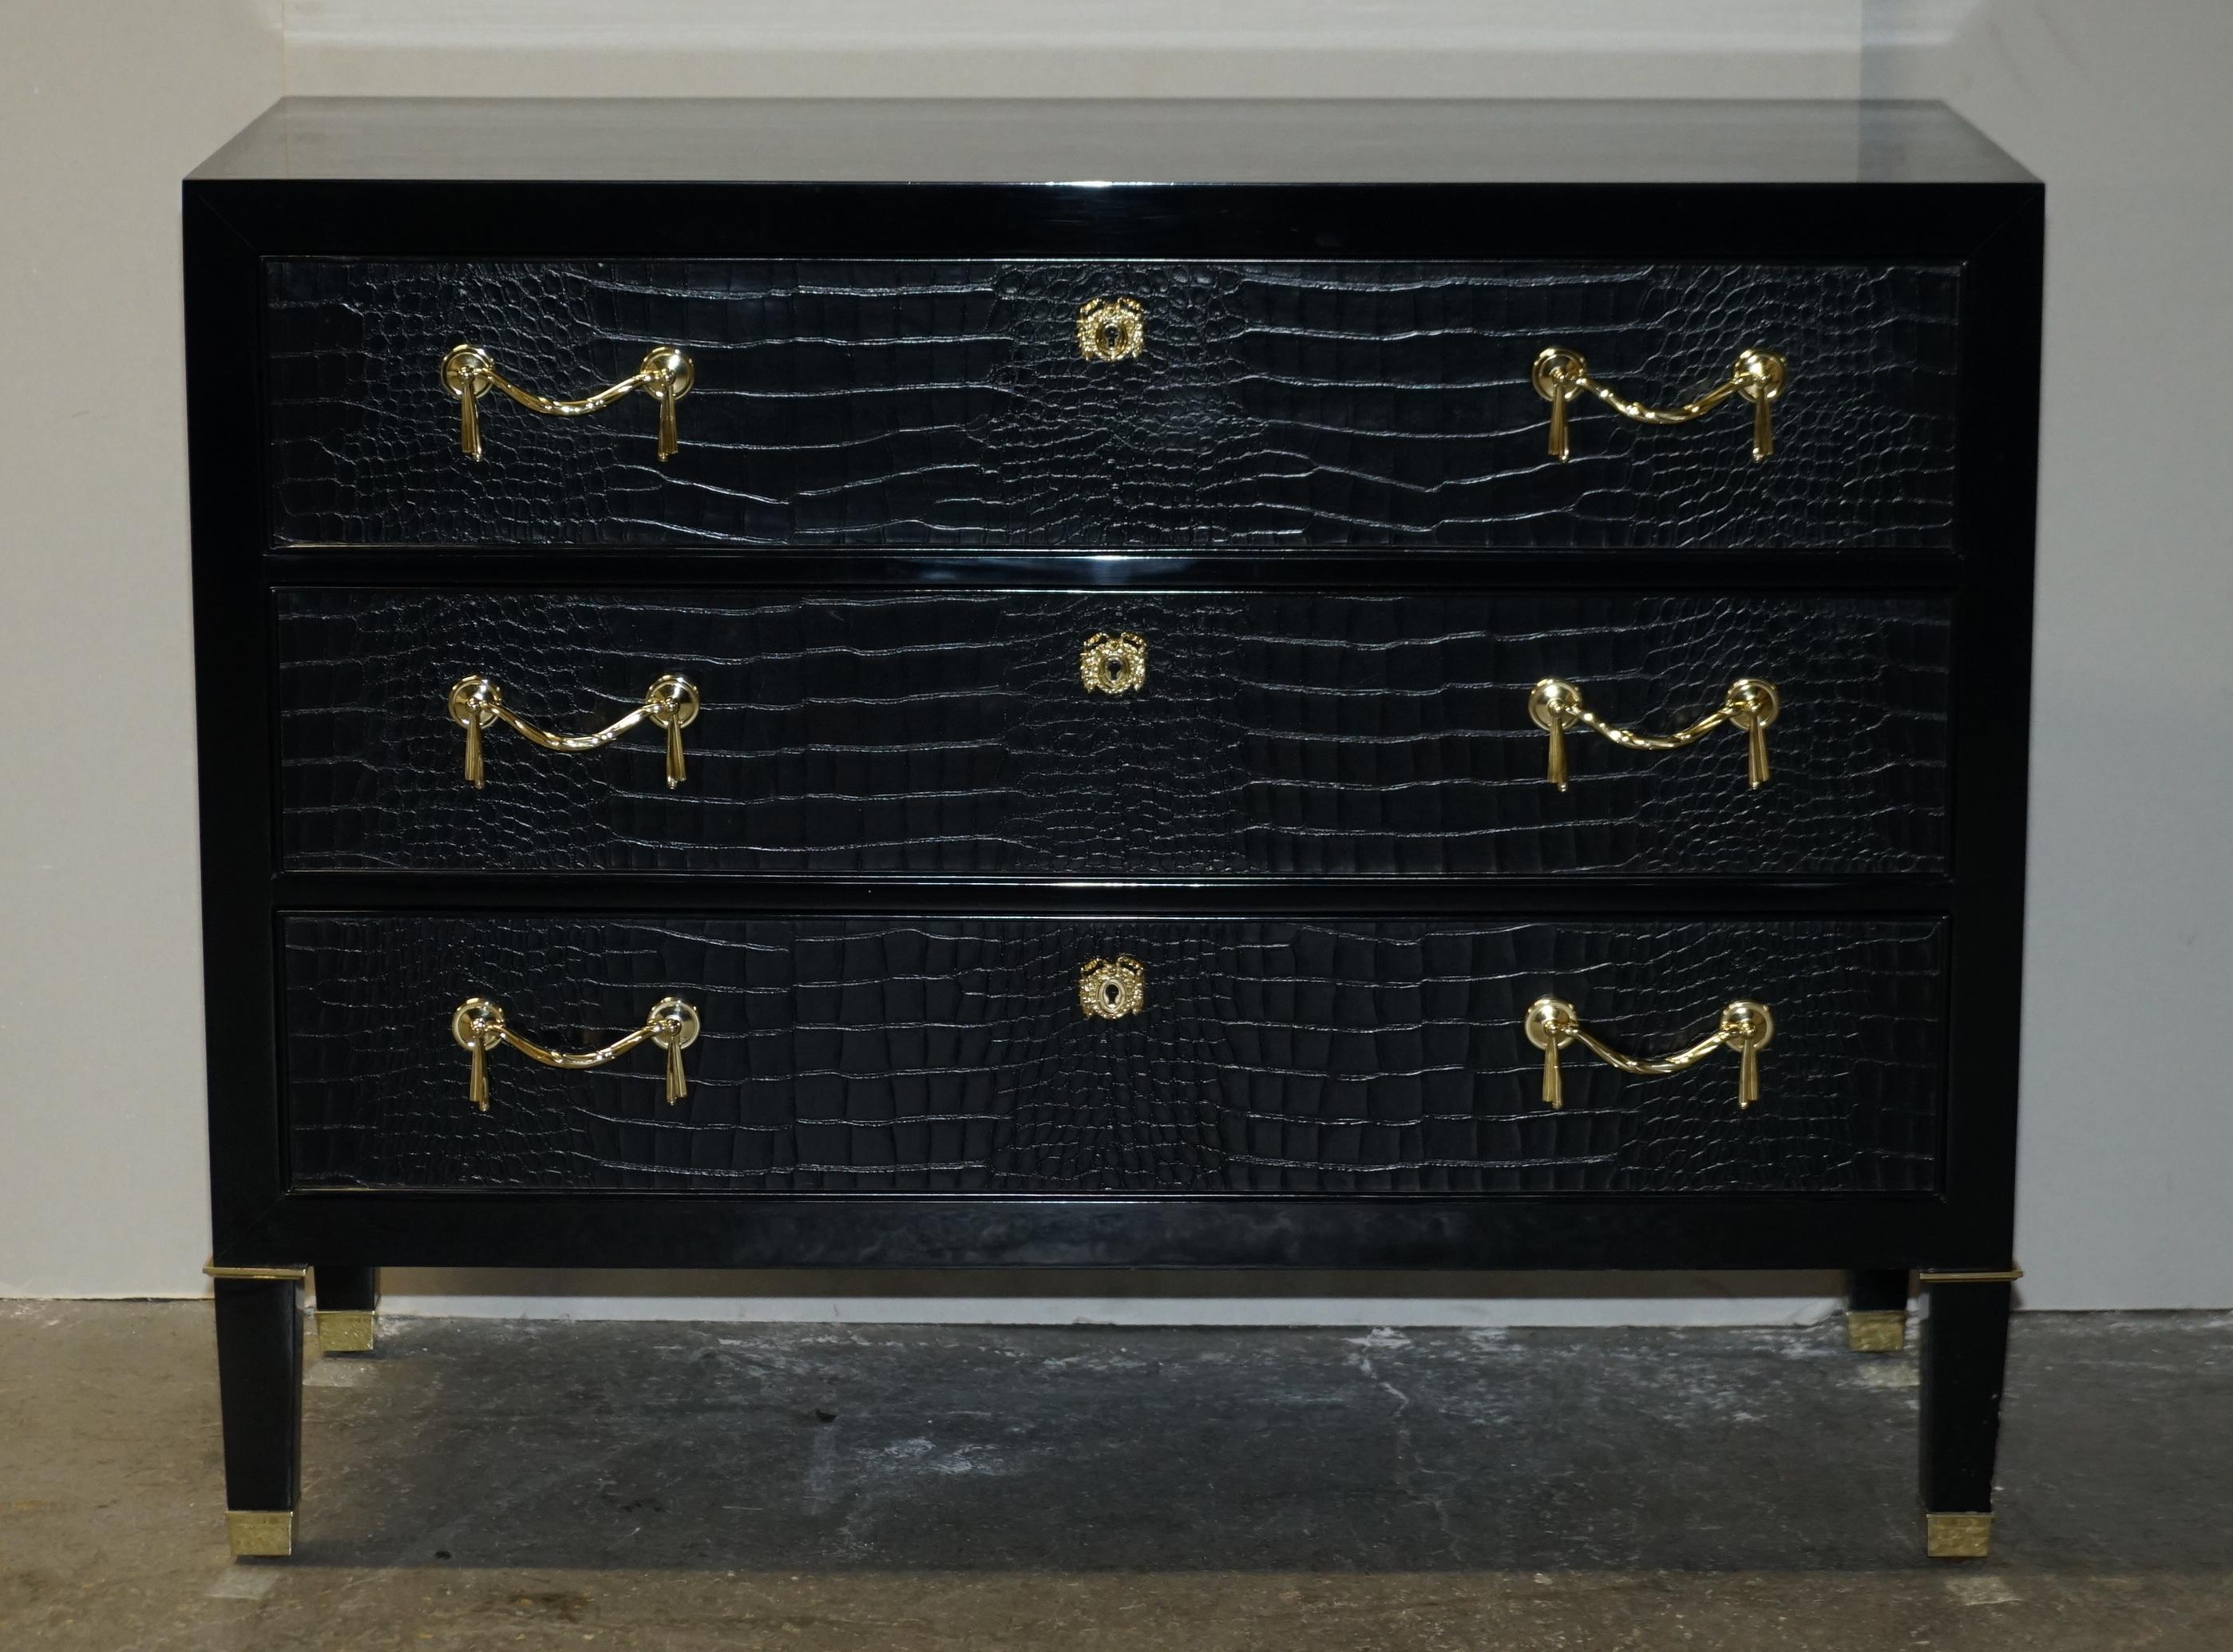 American Classical PAIR OF RALPH LAUREN BROOK STREET CHEST OF DRAWERS ALLiGATOR LEATHER